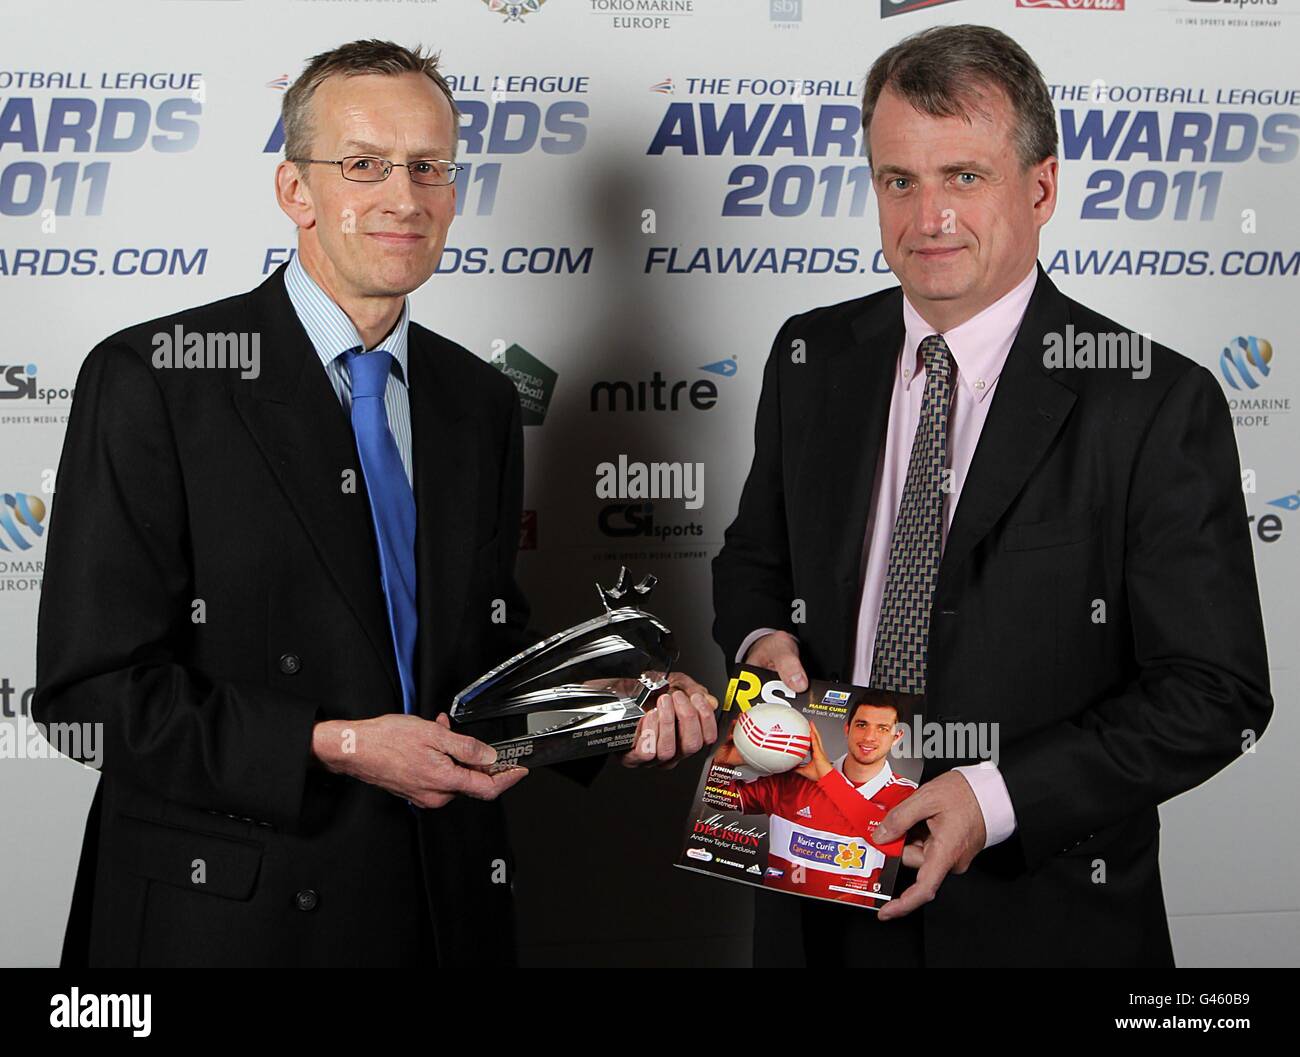 Redsquare's Graham Bell Senior Media And Public Relations officer wins the Csi Sports Best Matchday Programme for Middlesborough Matchday Programme from Csi Sports Chief Executive Chris Guinness at the 2011 Football League Awards at the Brewery, London. Stock Photo